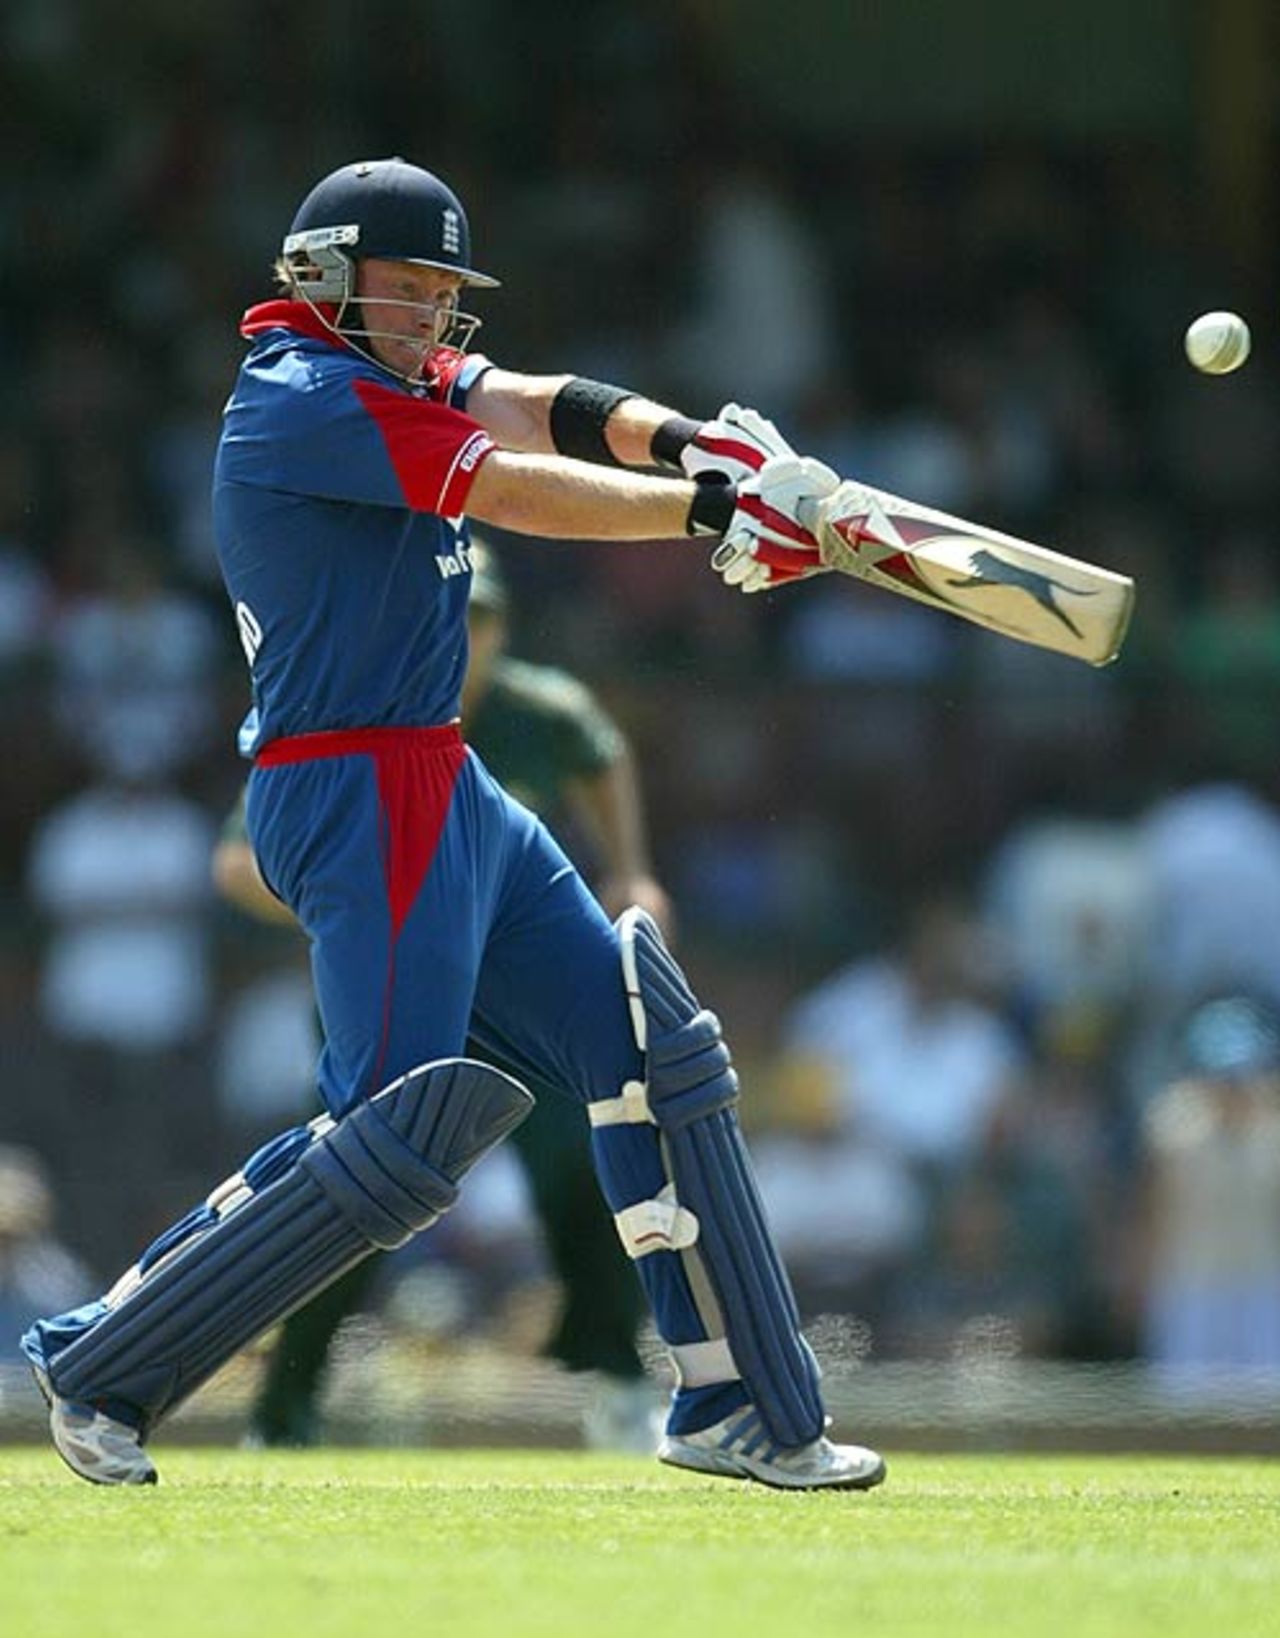 Ian Bell hammers a ball through the off side on his way to a half-century, Australia v England, CB Series, 10th match, Sydney, February 2, 2007